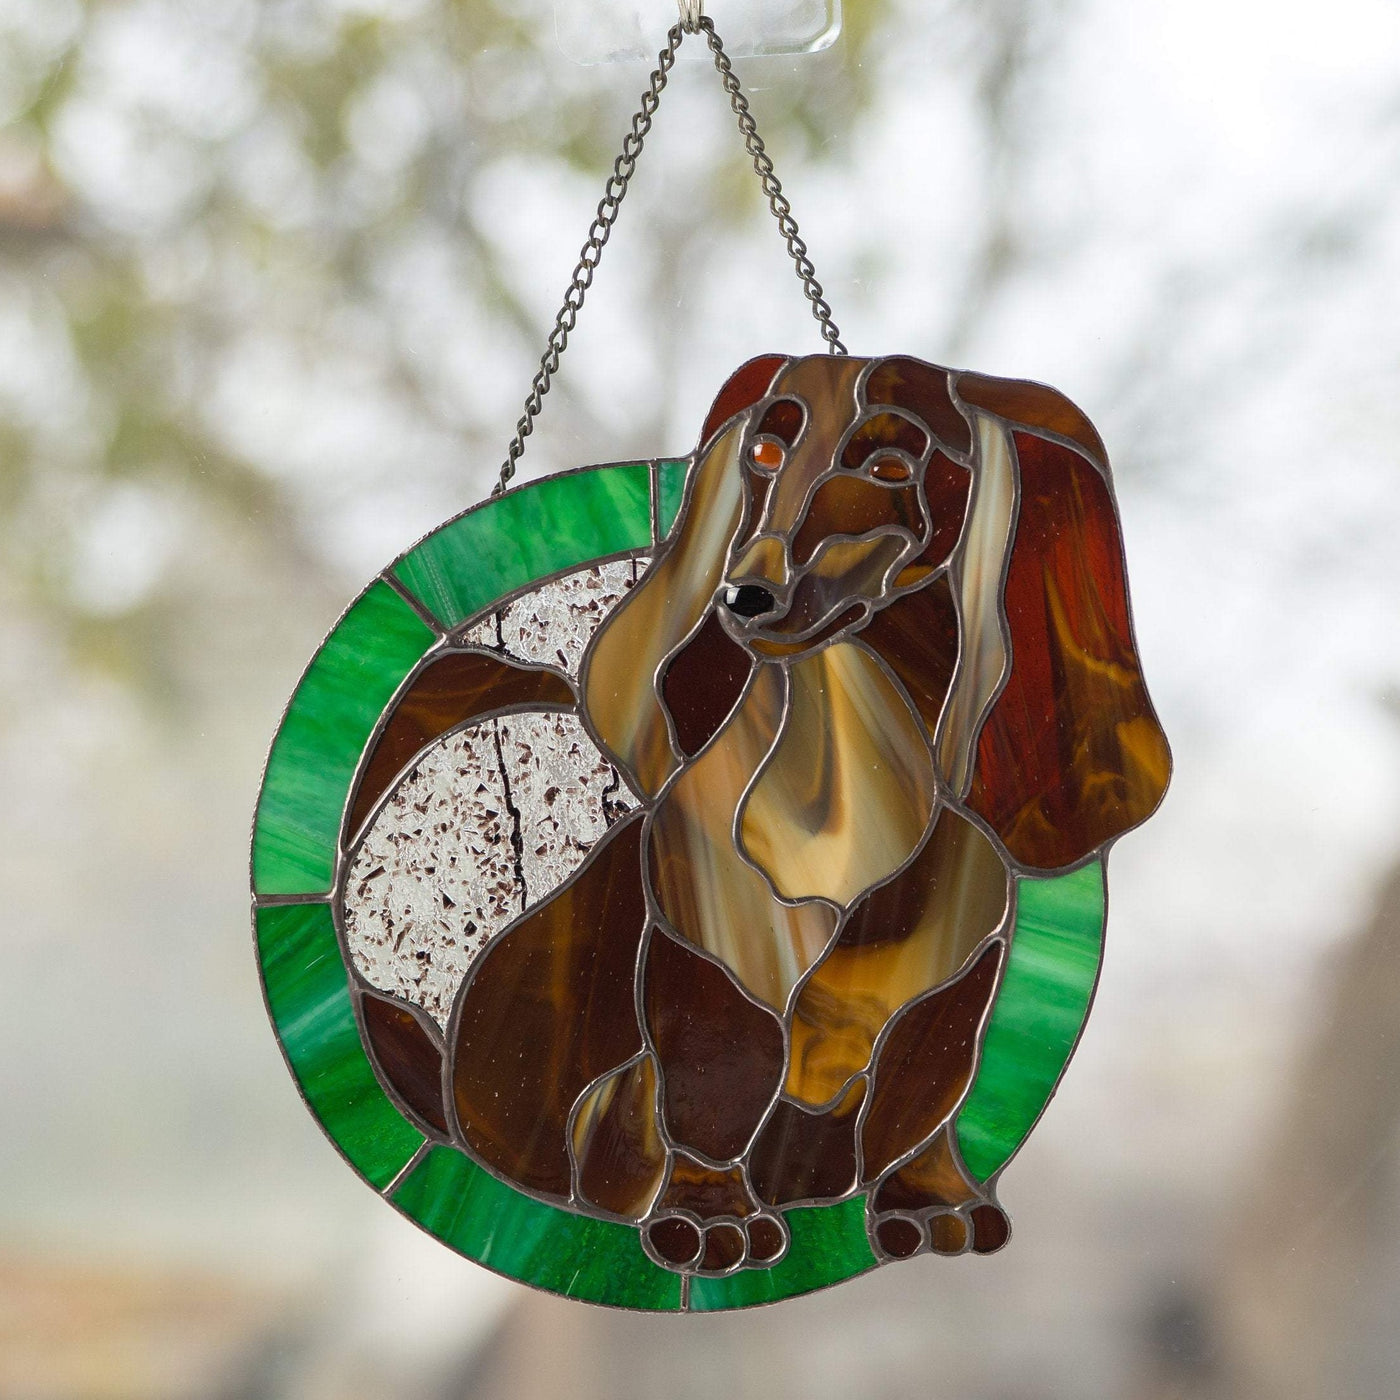 Stained glass panel depicting Dachshund for window decor